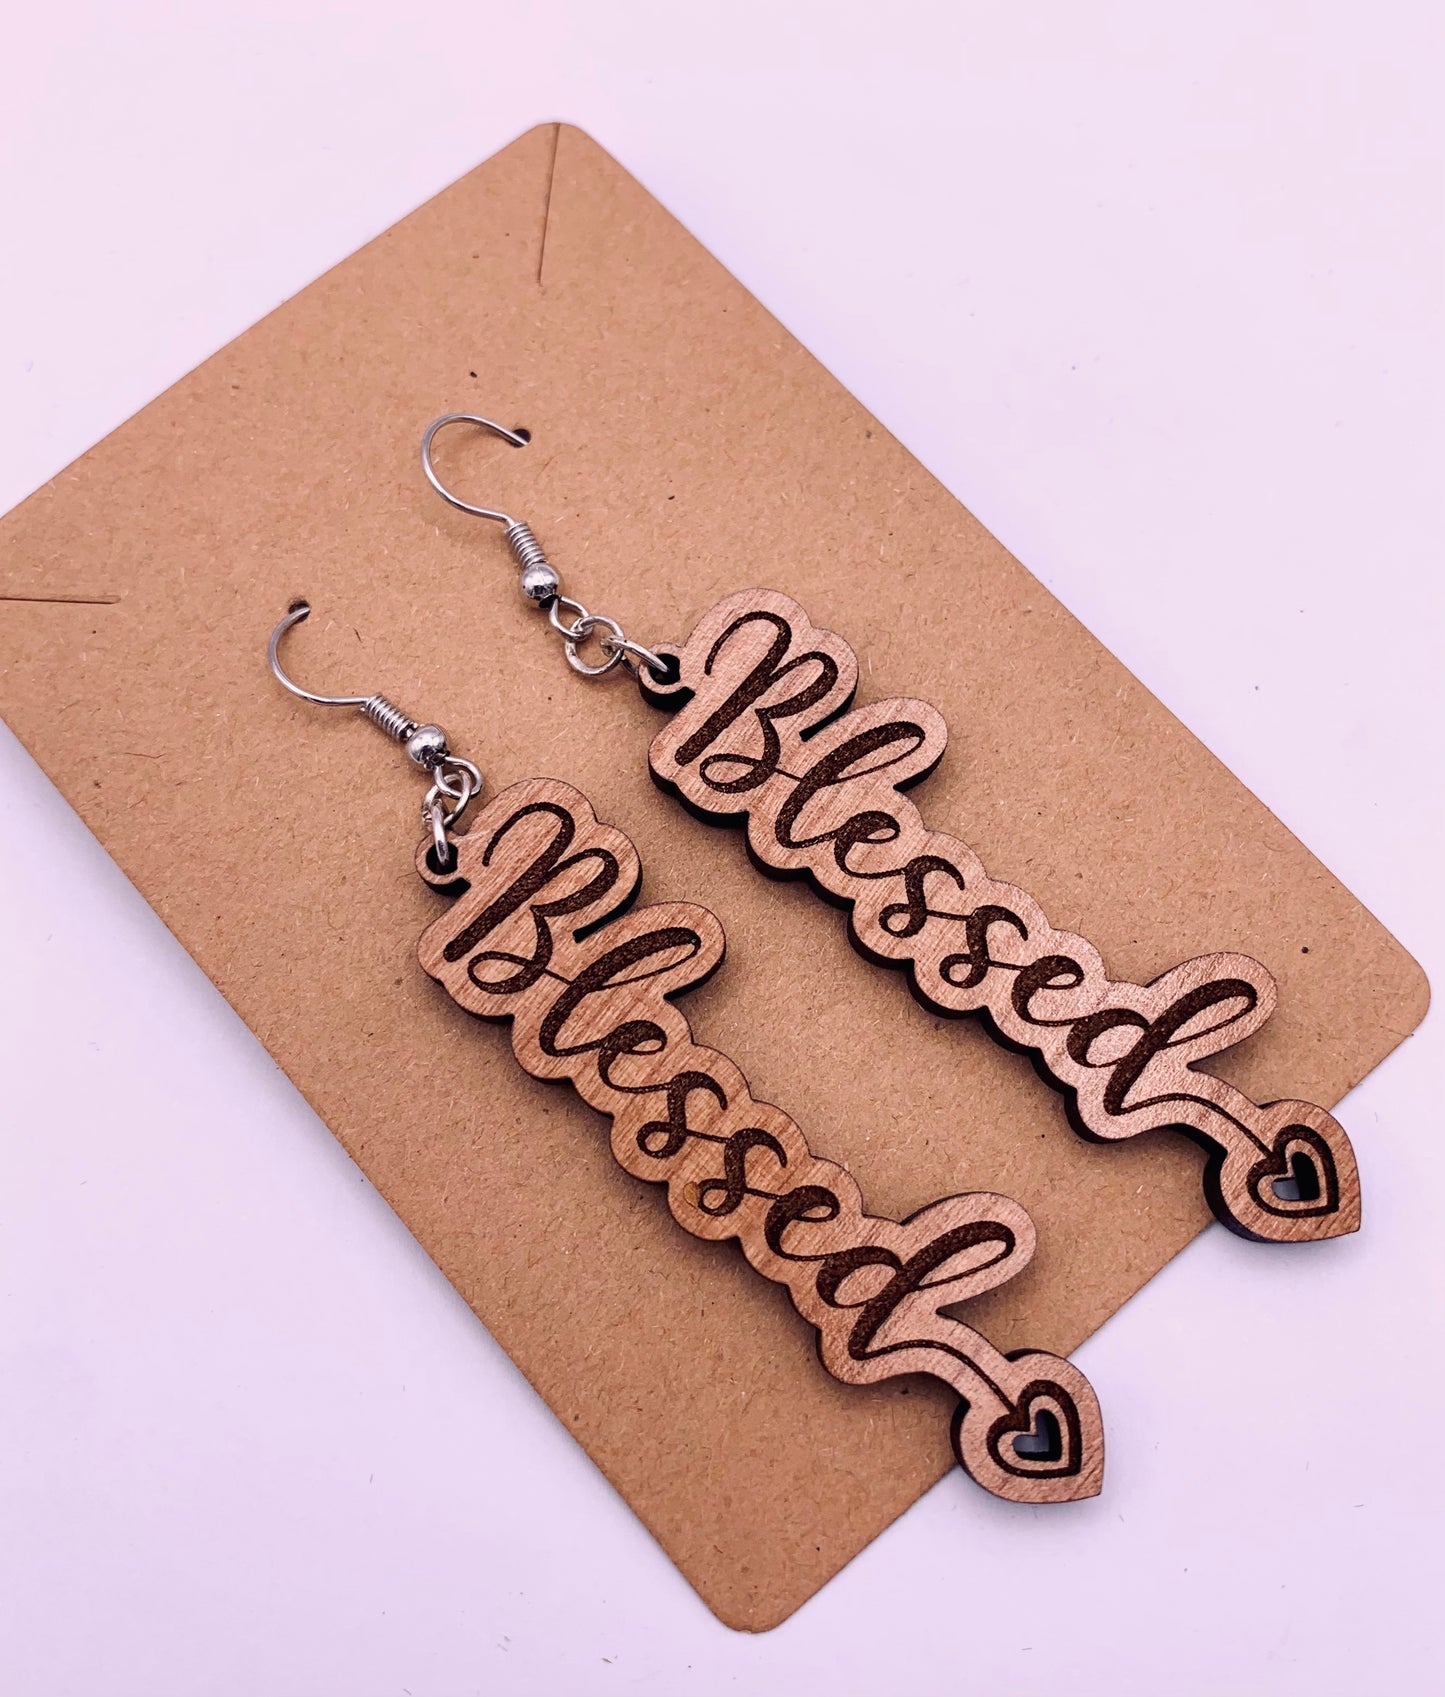 Blessed Earrings - Deep In The Art Creations